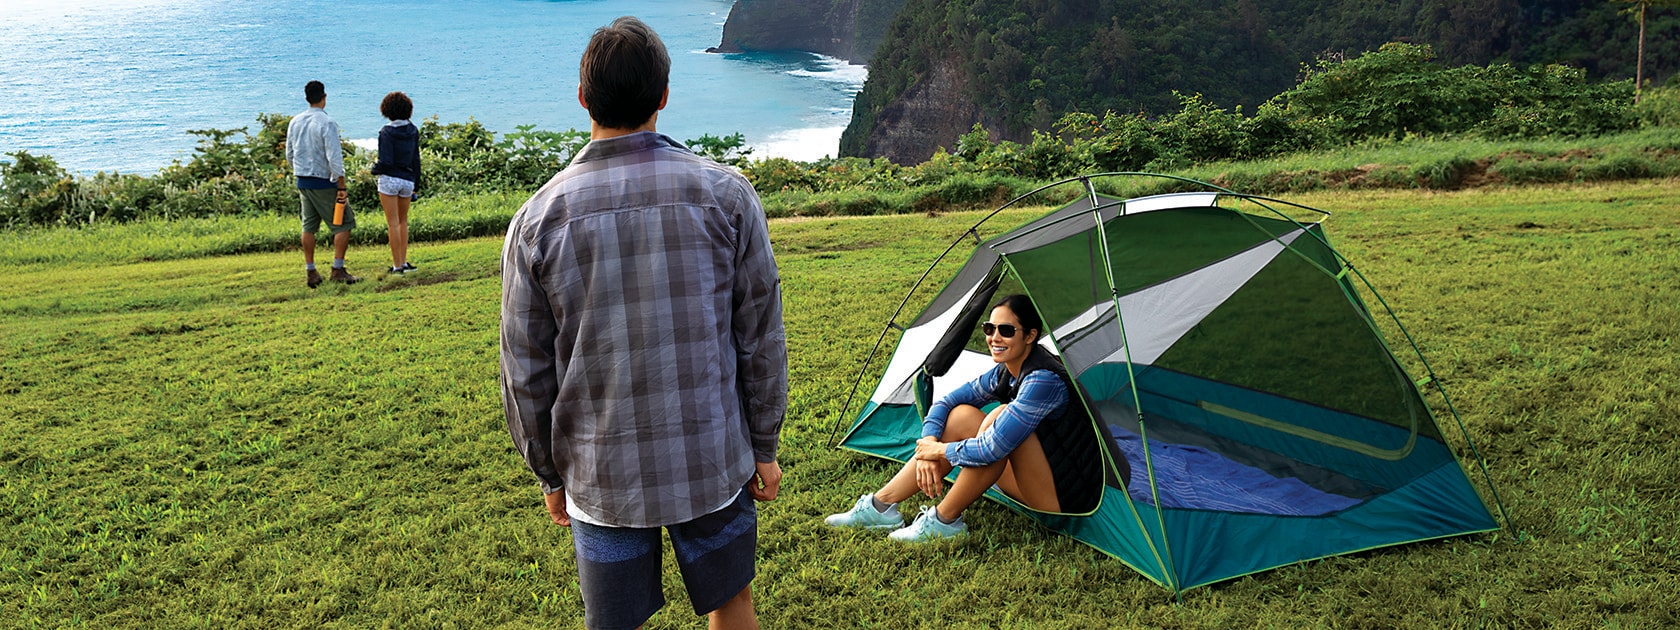 man standing next to woman sitting inside tent on a grassy hill overlooking ocean cliffside